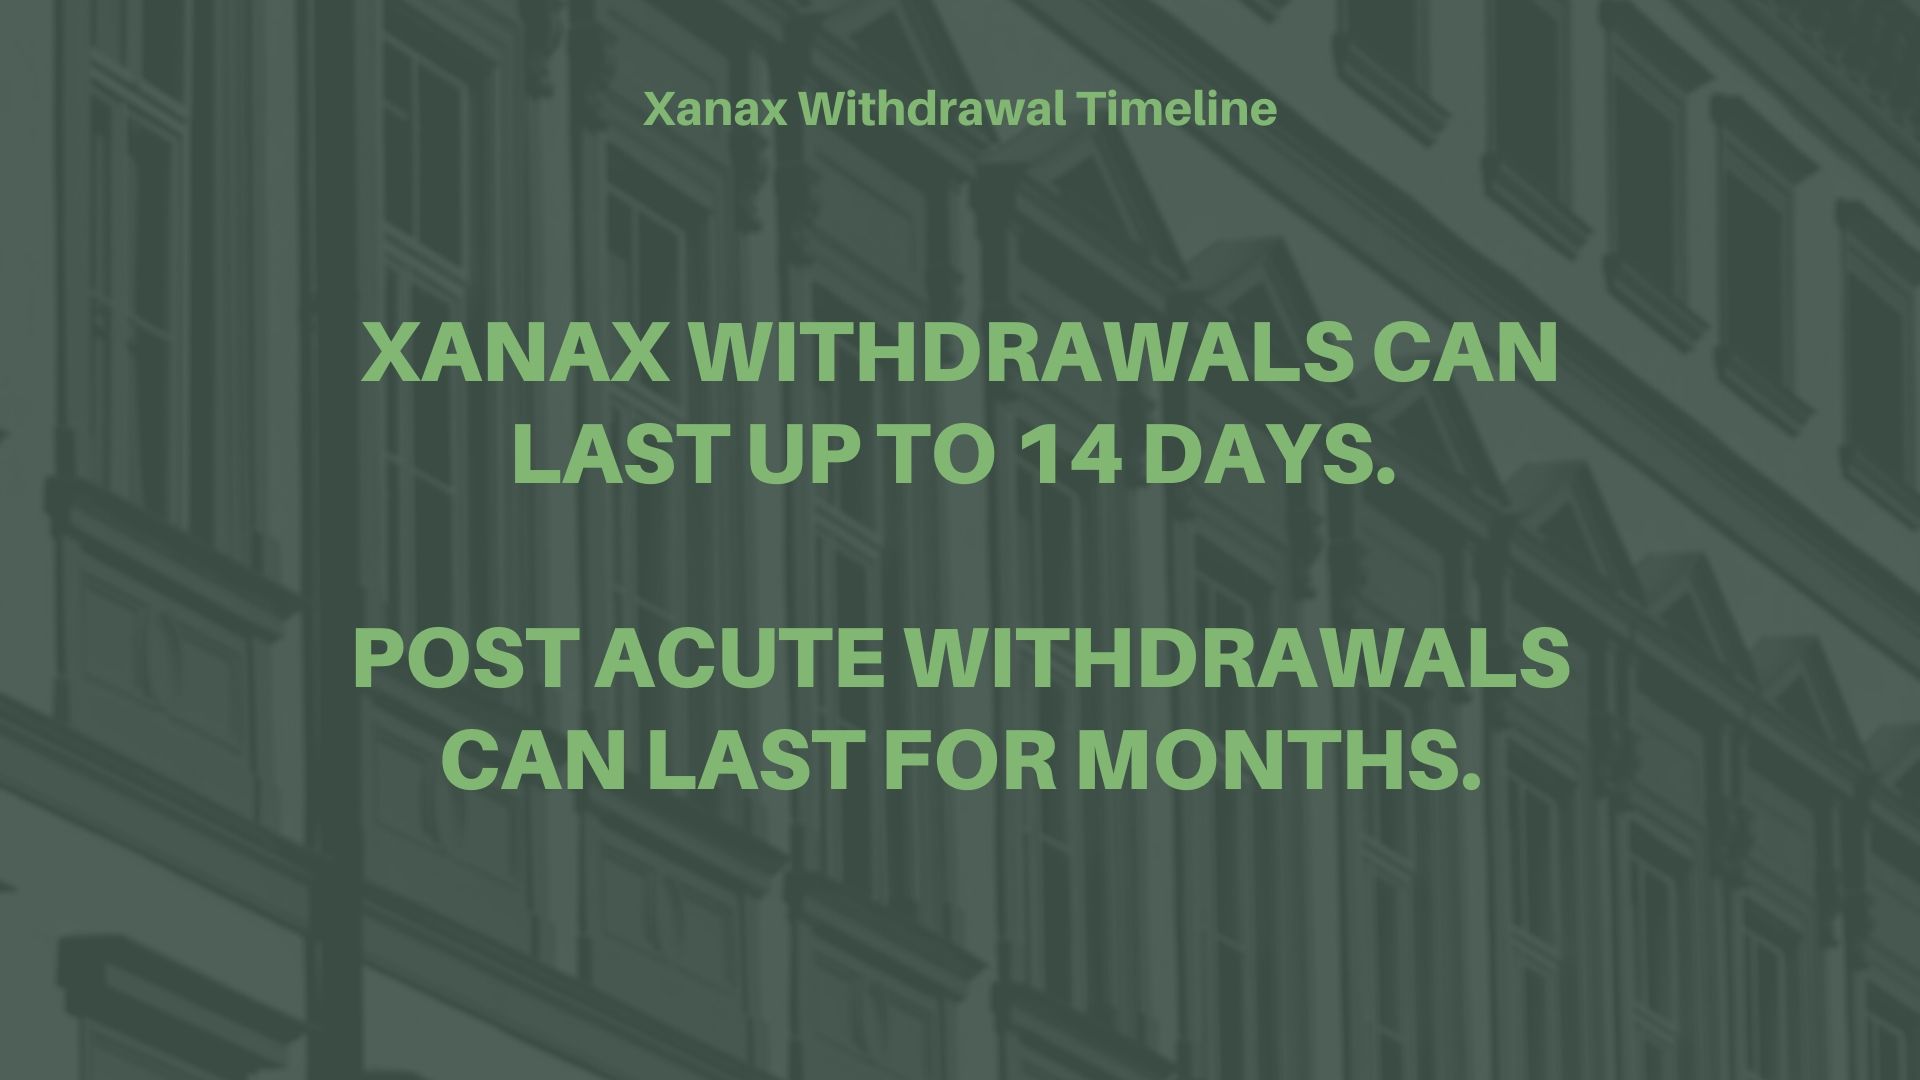 xanax withdrawals can last 14 days